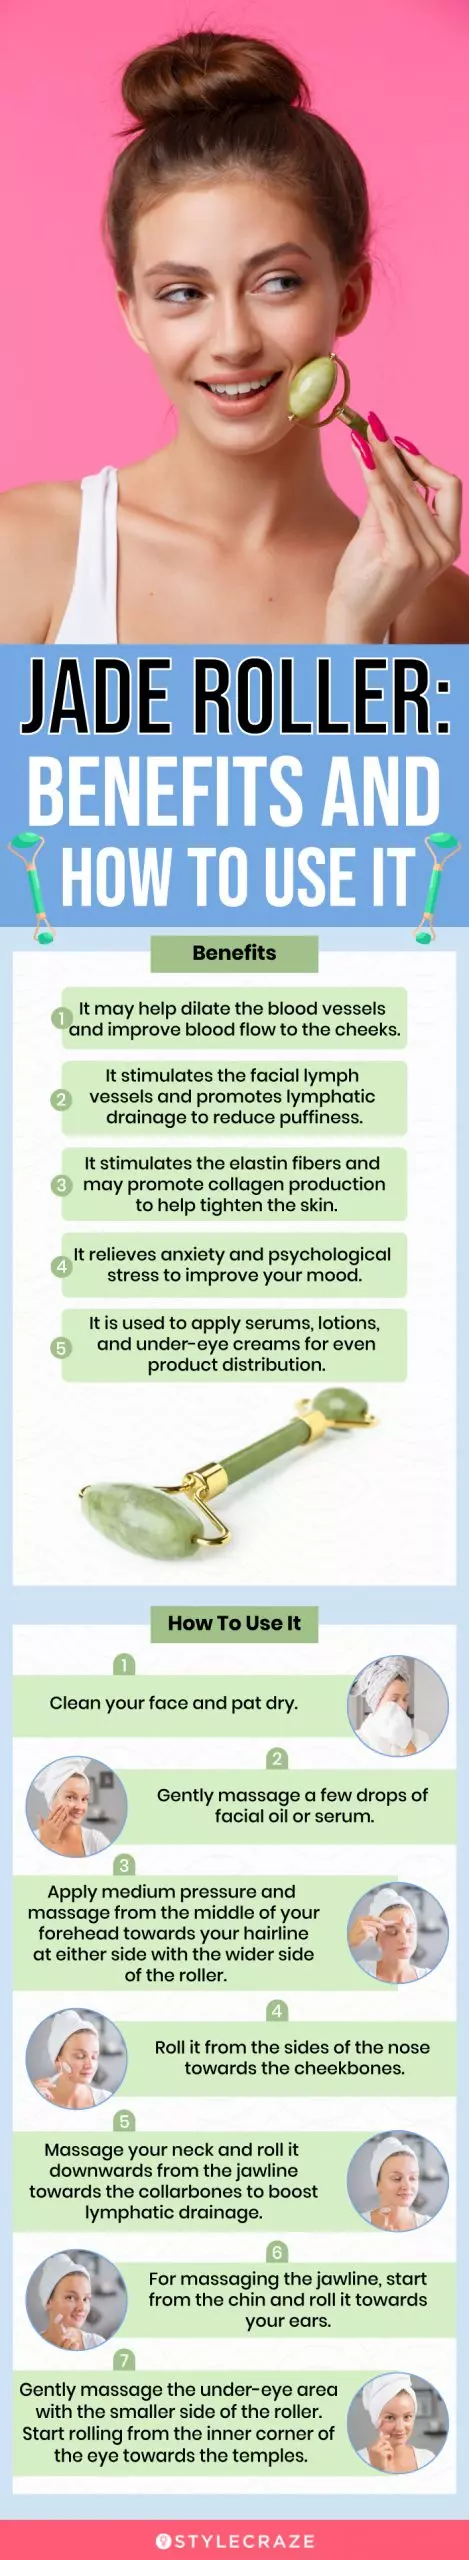 jade roller benefits and how to use (infographic)